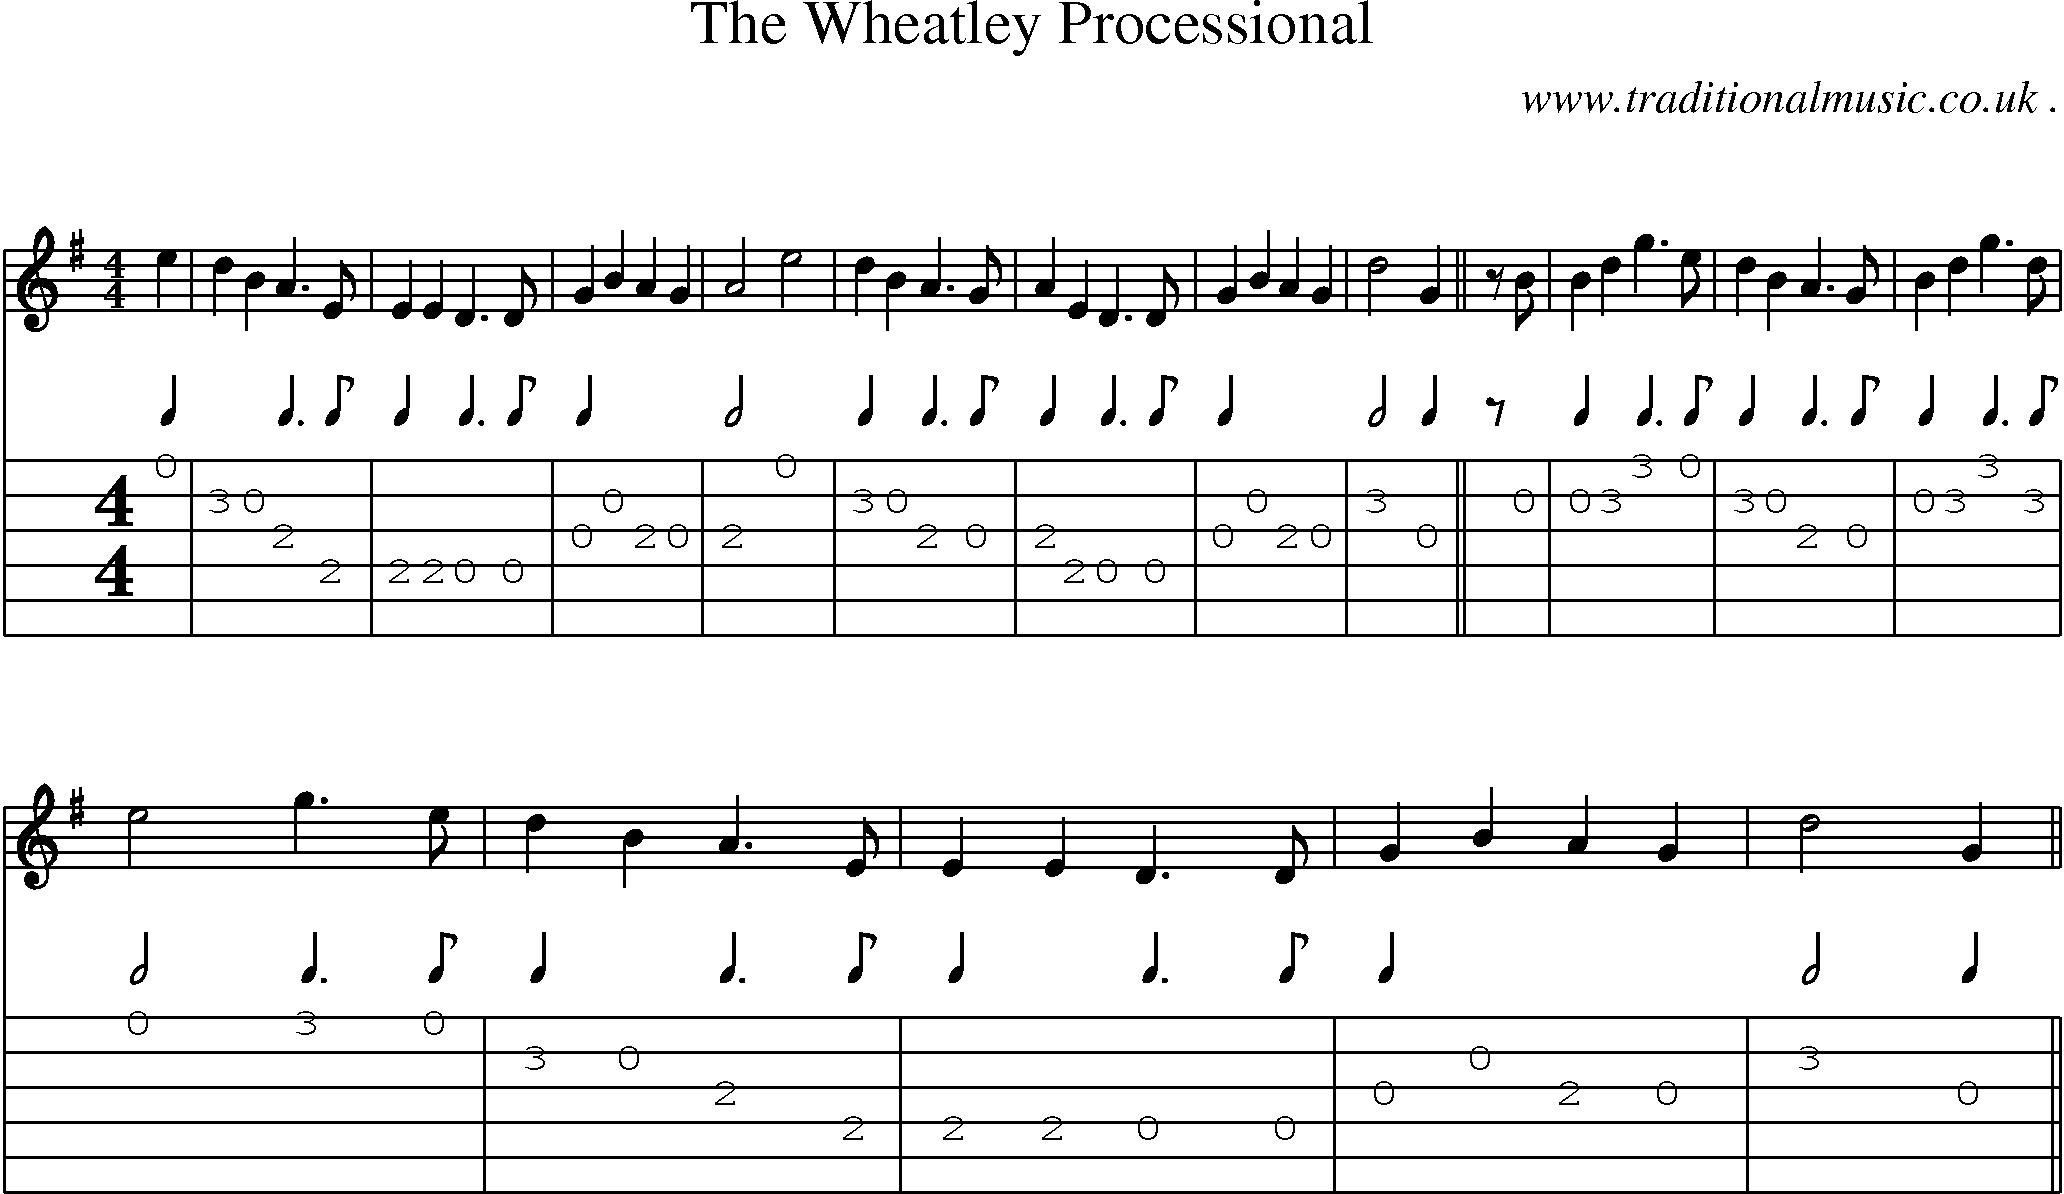 Sheet-Music and Guitar Tabs for The Wheatley Processional